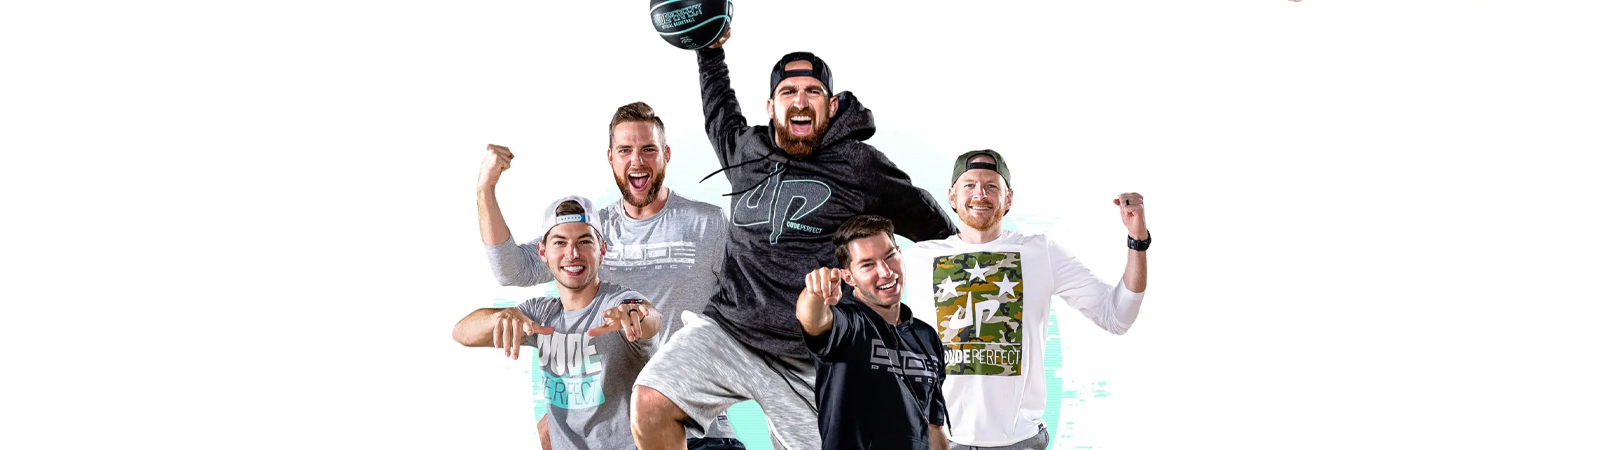 9. Dude Perfect